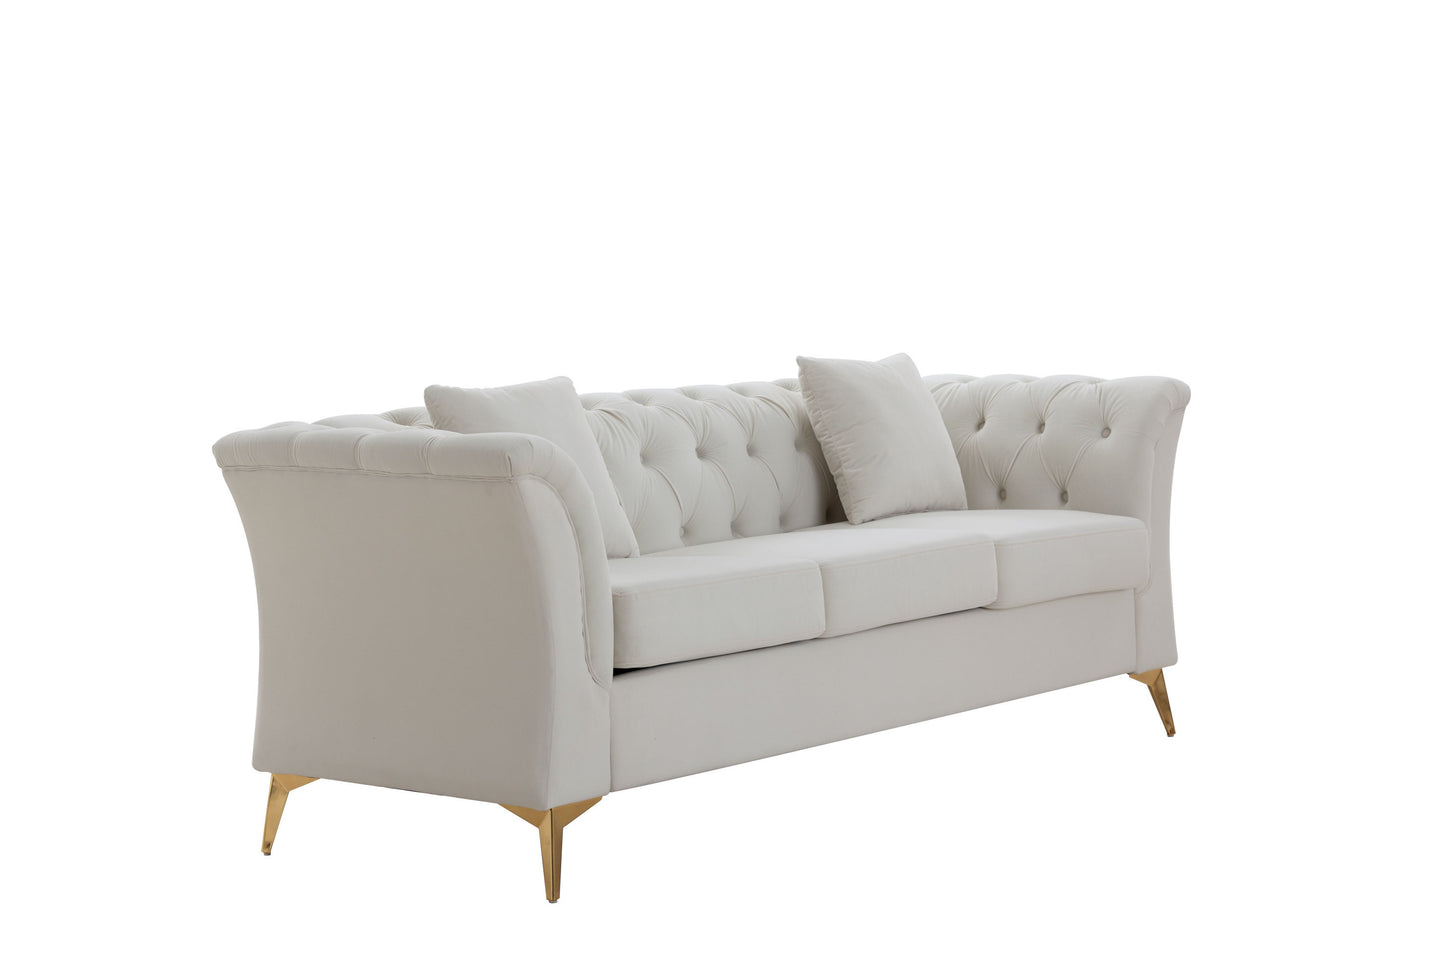 Modern Chesterfield Curved Sofa Tufted Velvet Couch 3 Seat Button Tufed Loveseat with Scroll Arms and Gold Metal Legs for Living Room Bedroom Beige